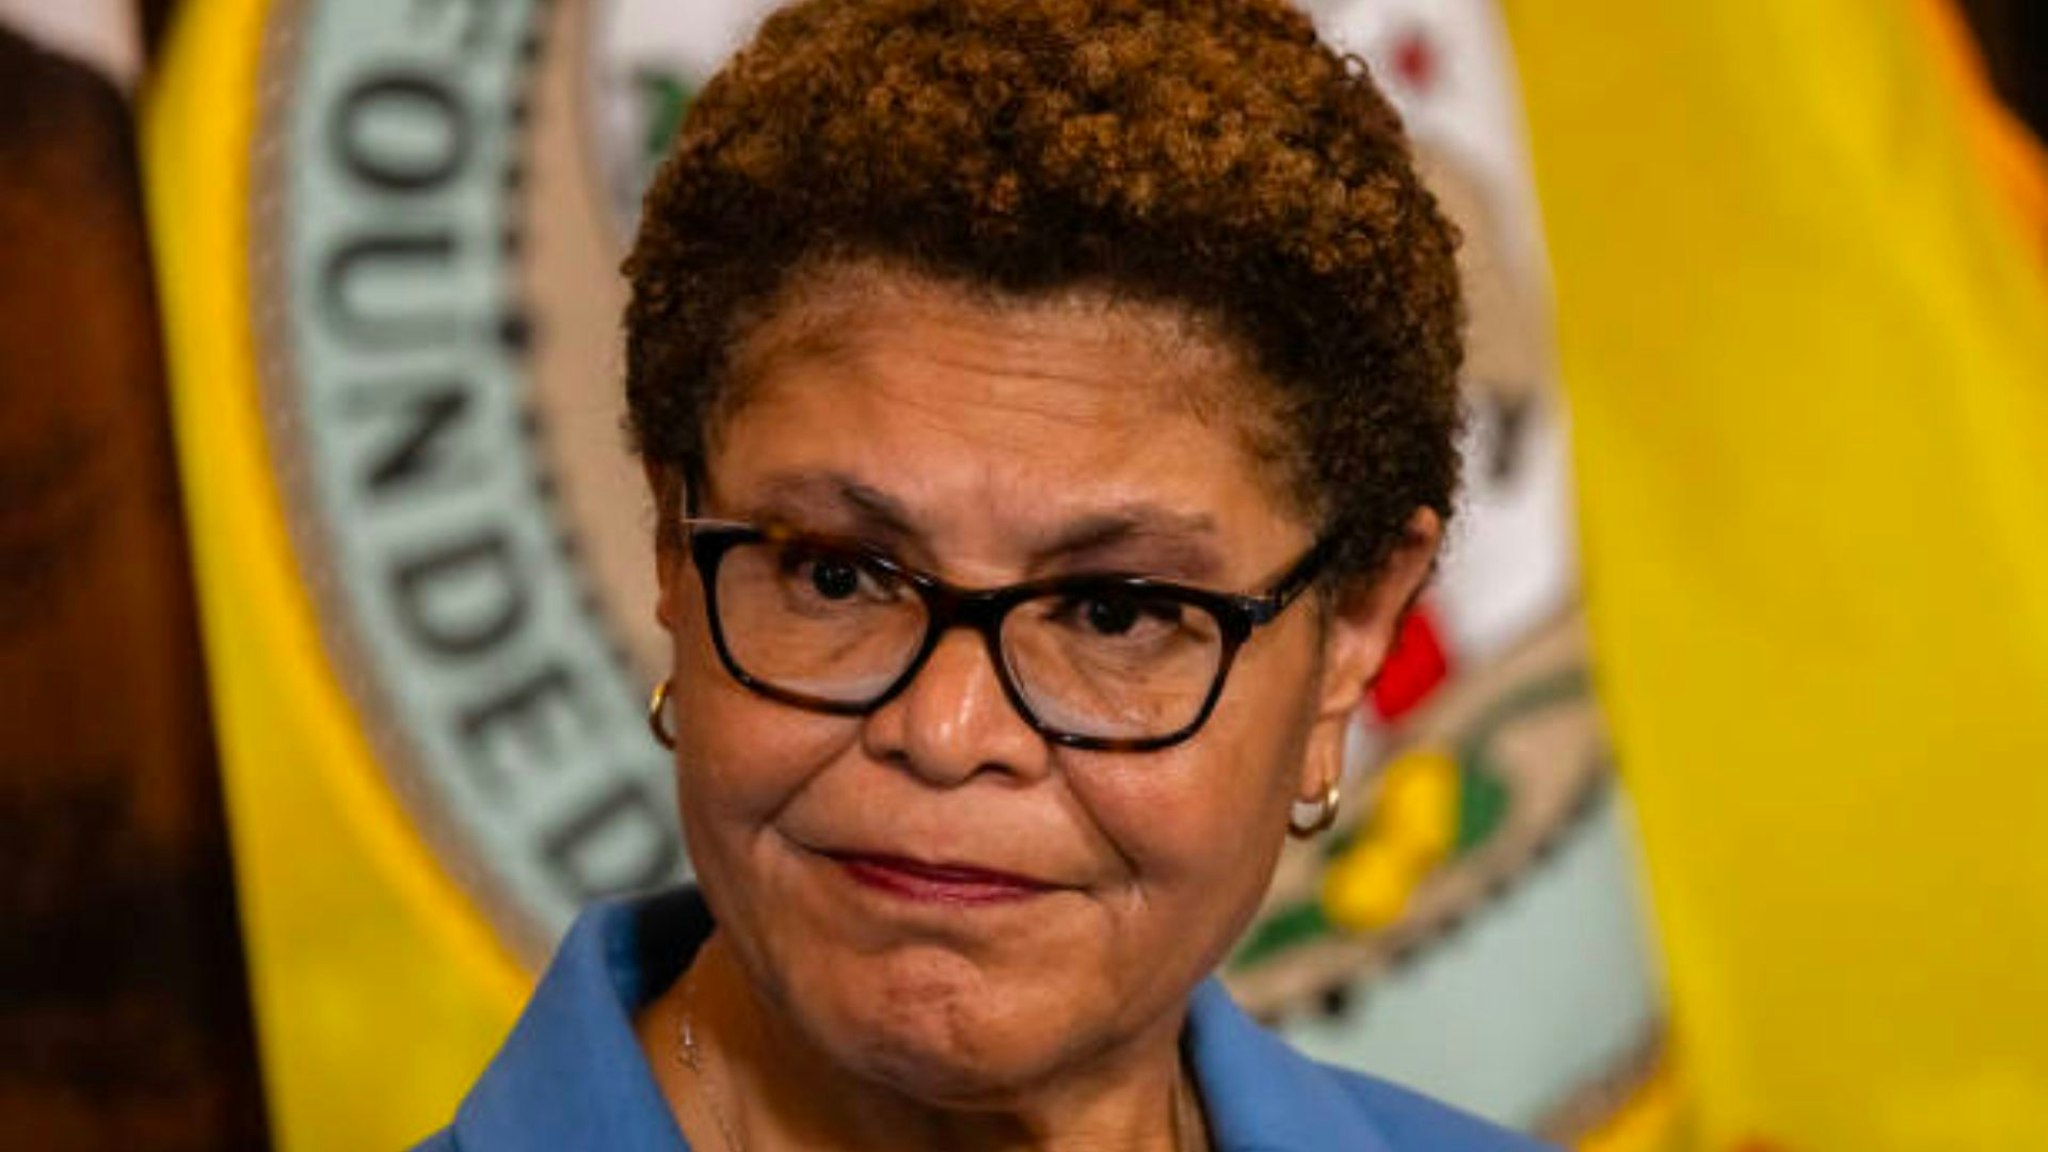 LOS ANGELES, CA - AUGUST 17: L.A. Mayor Karen Bass announces establishing a task force to investigate, apprehend and prosecute suspects who have committed retail theft as businesses grapple with an uptick of smash-and-grabs in recent weeks a press conference held at City Hall in Los Angeles, CA.